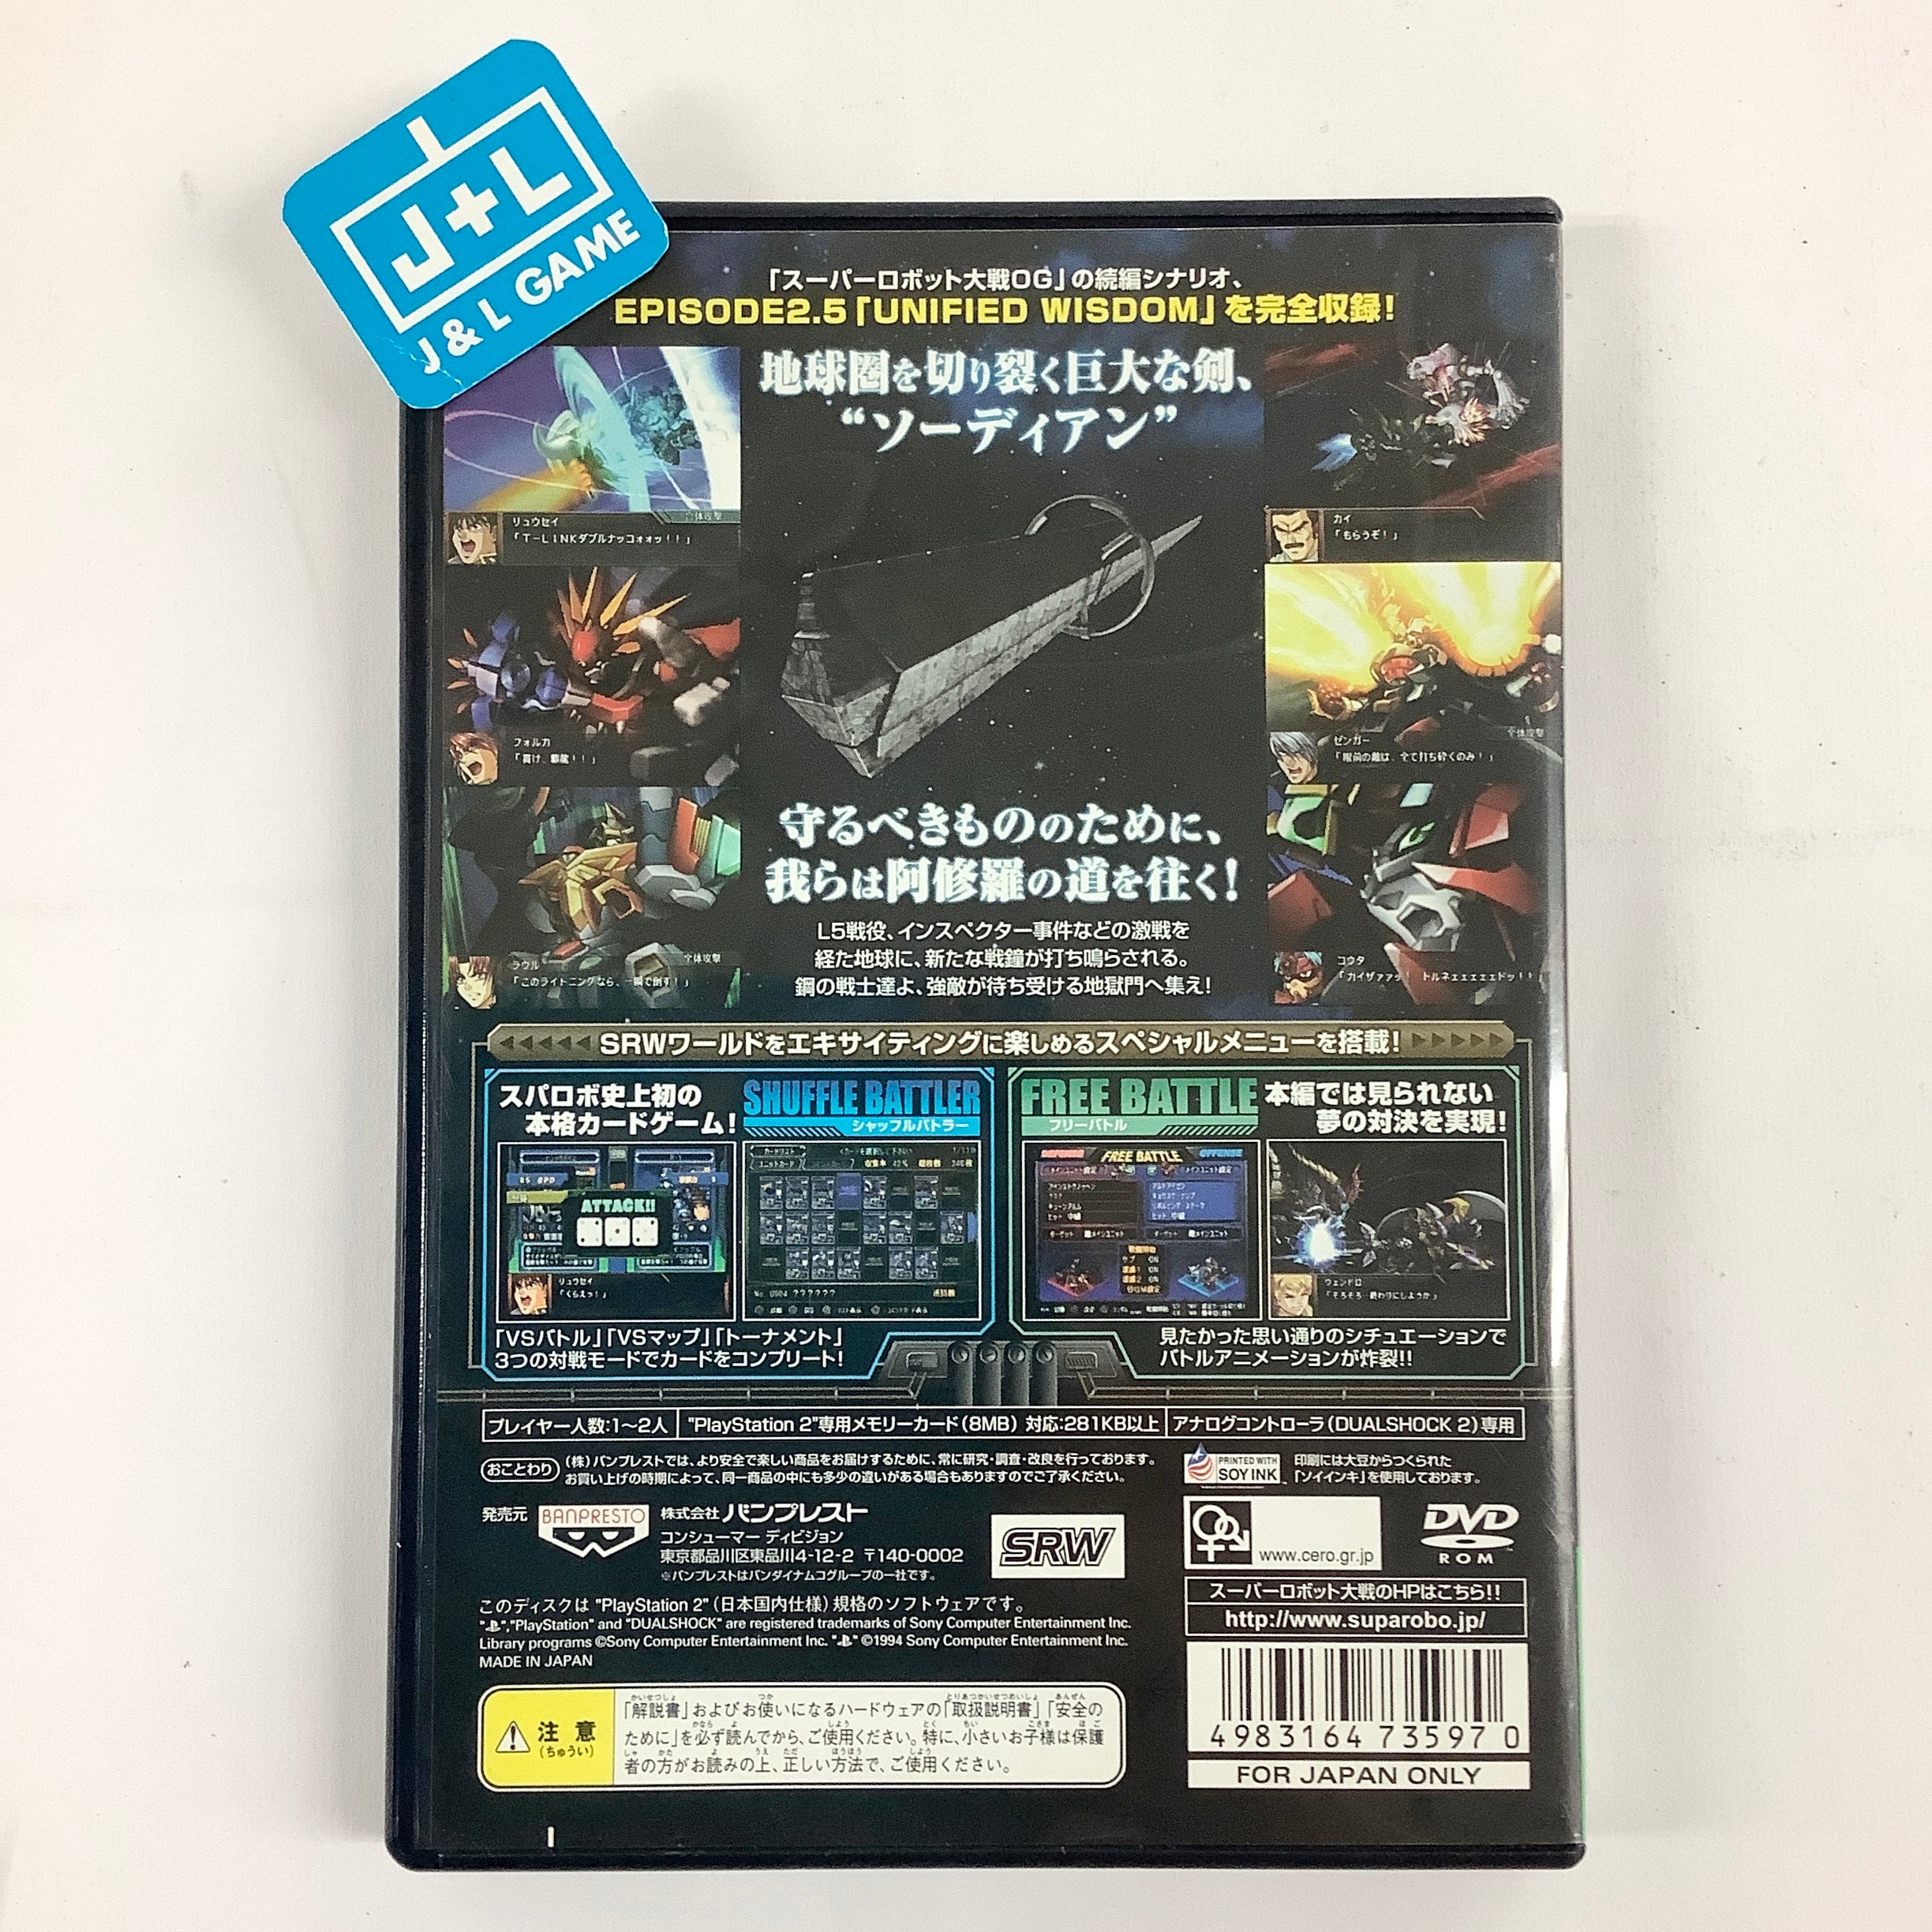 Super Robot Taisen Original Generation Gaiden (Limited Collection Figure  Box) - (PS2) PlayStation 2 [Pre-Owned] (Japanese Import)